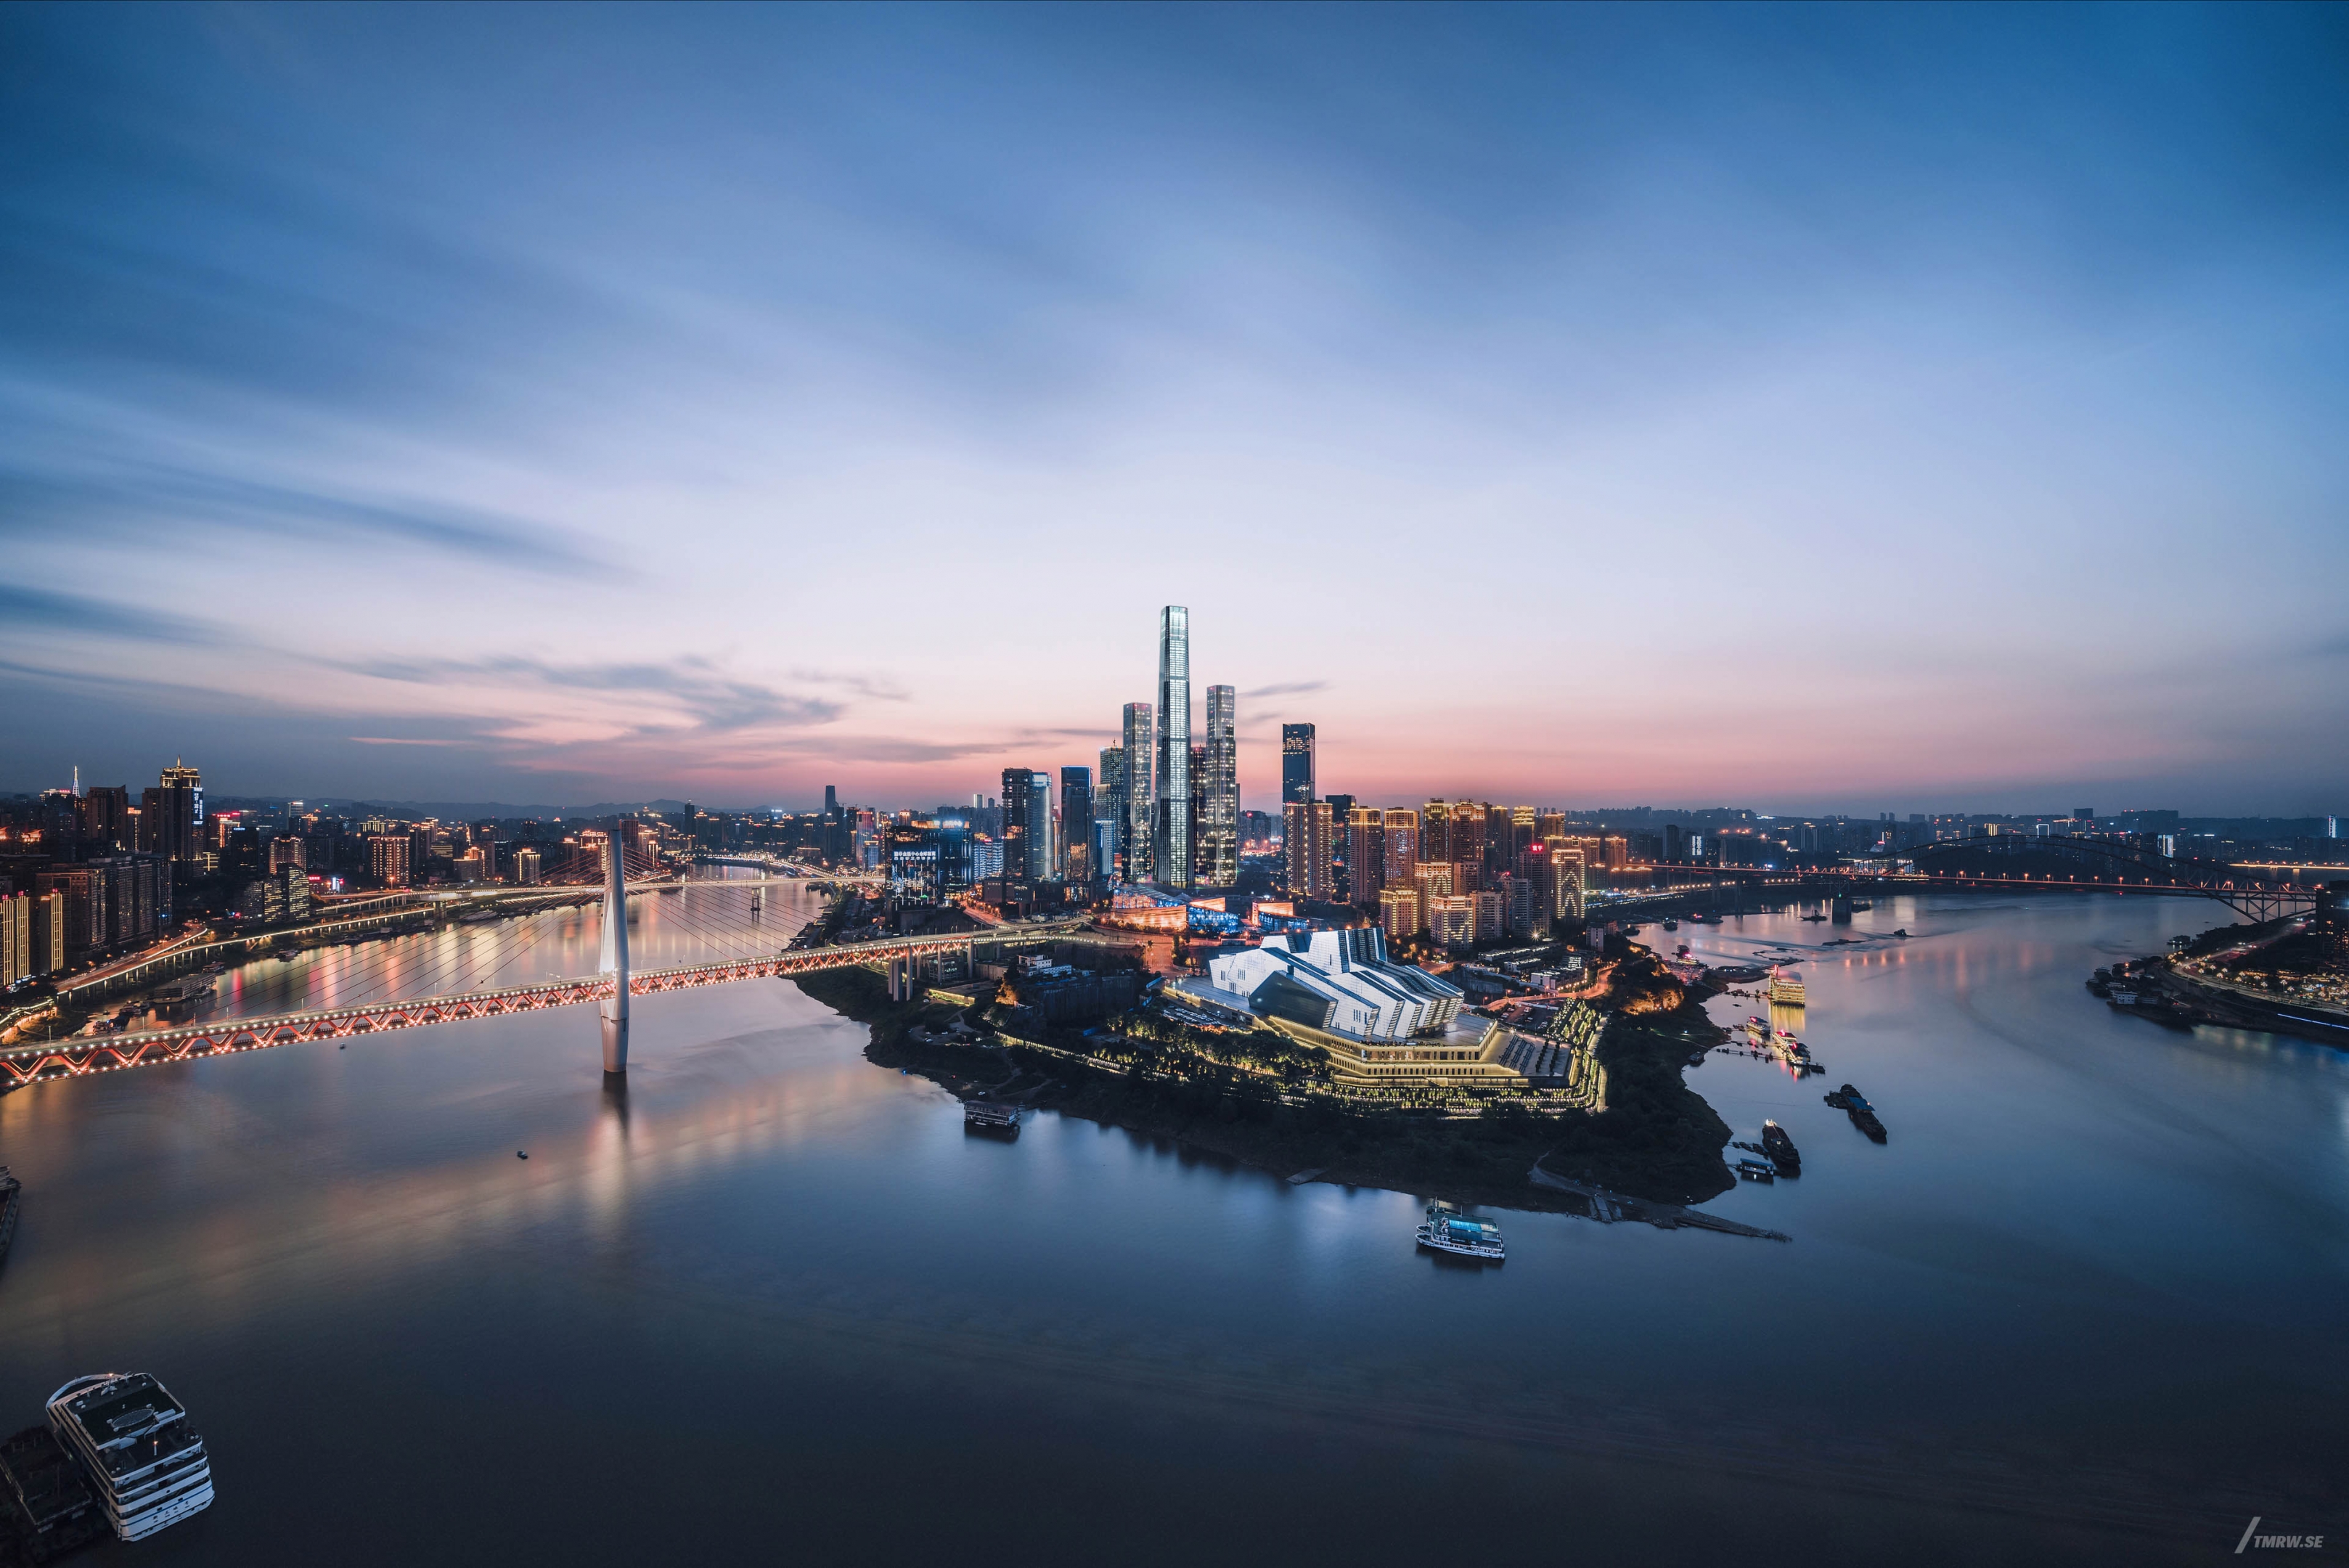 Architectural visualization of Chonqing for Tjad, aerial of Chongqing city at dusk